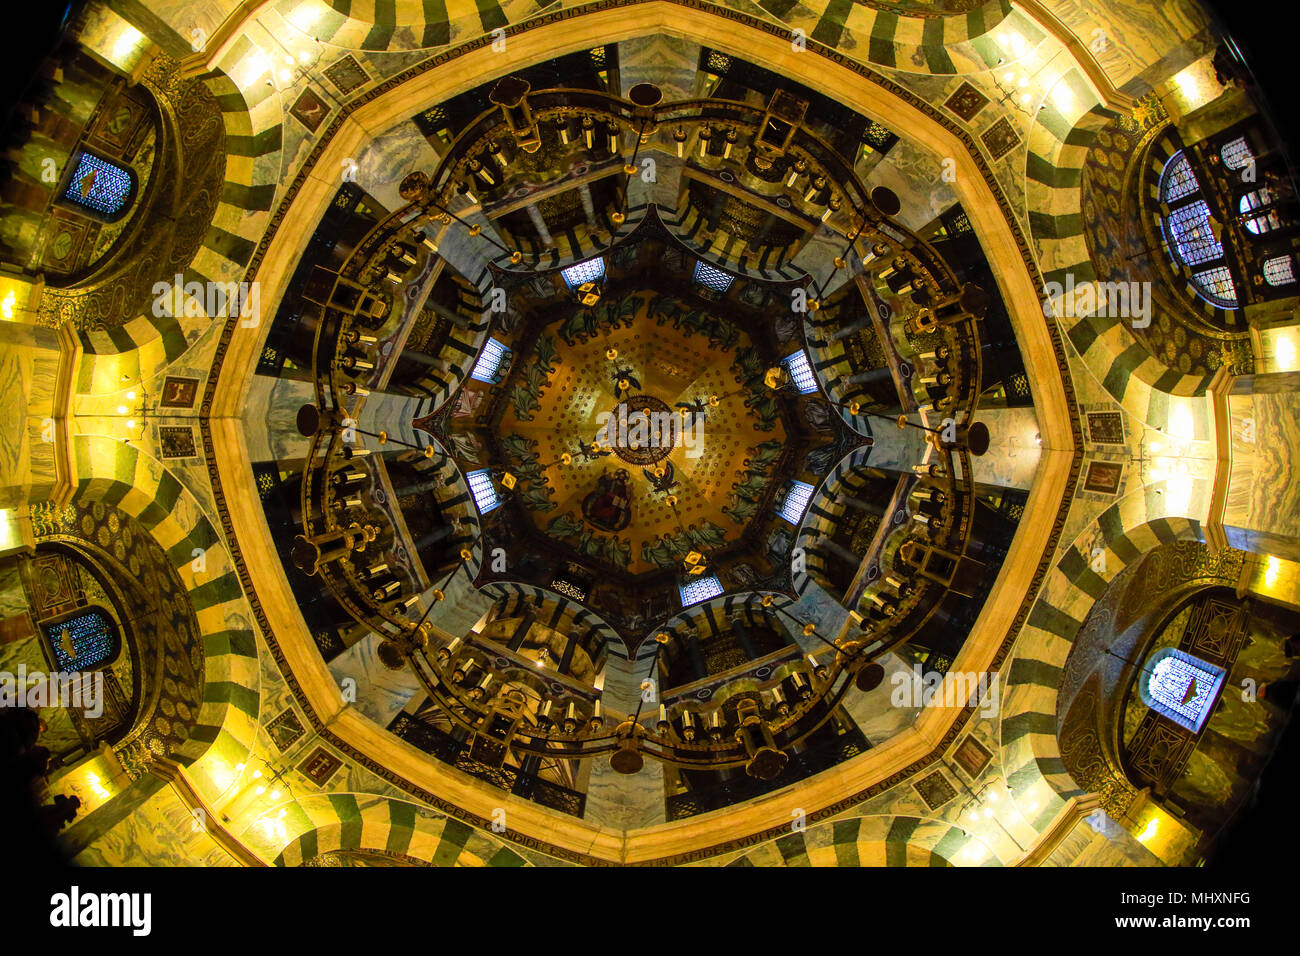 Inside view of the Aachen cathedral, a UNESCO World Heritage site in Aachen, Northrhine-Westfalia, Germany. Stock Photo